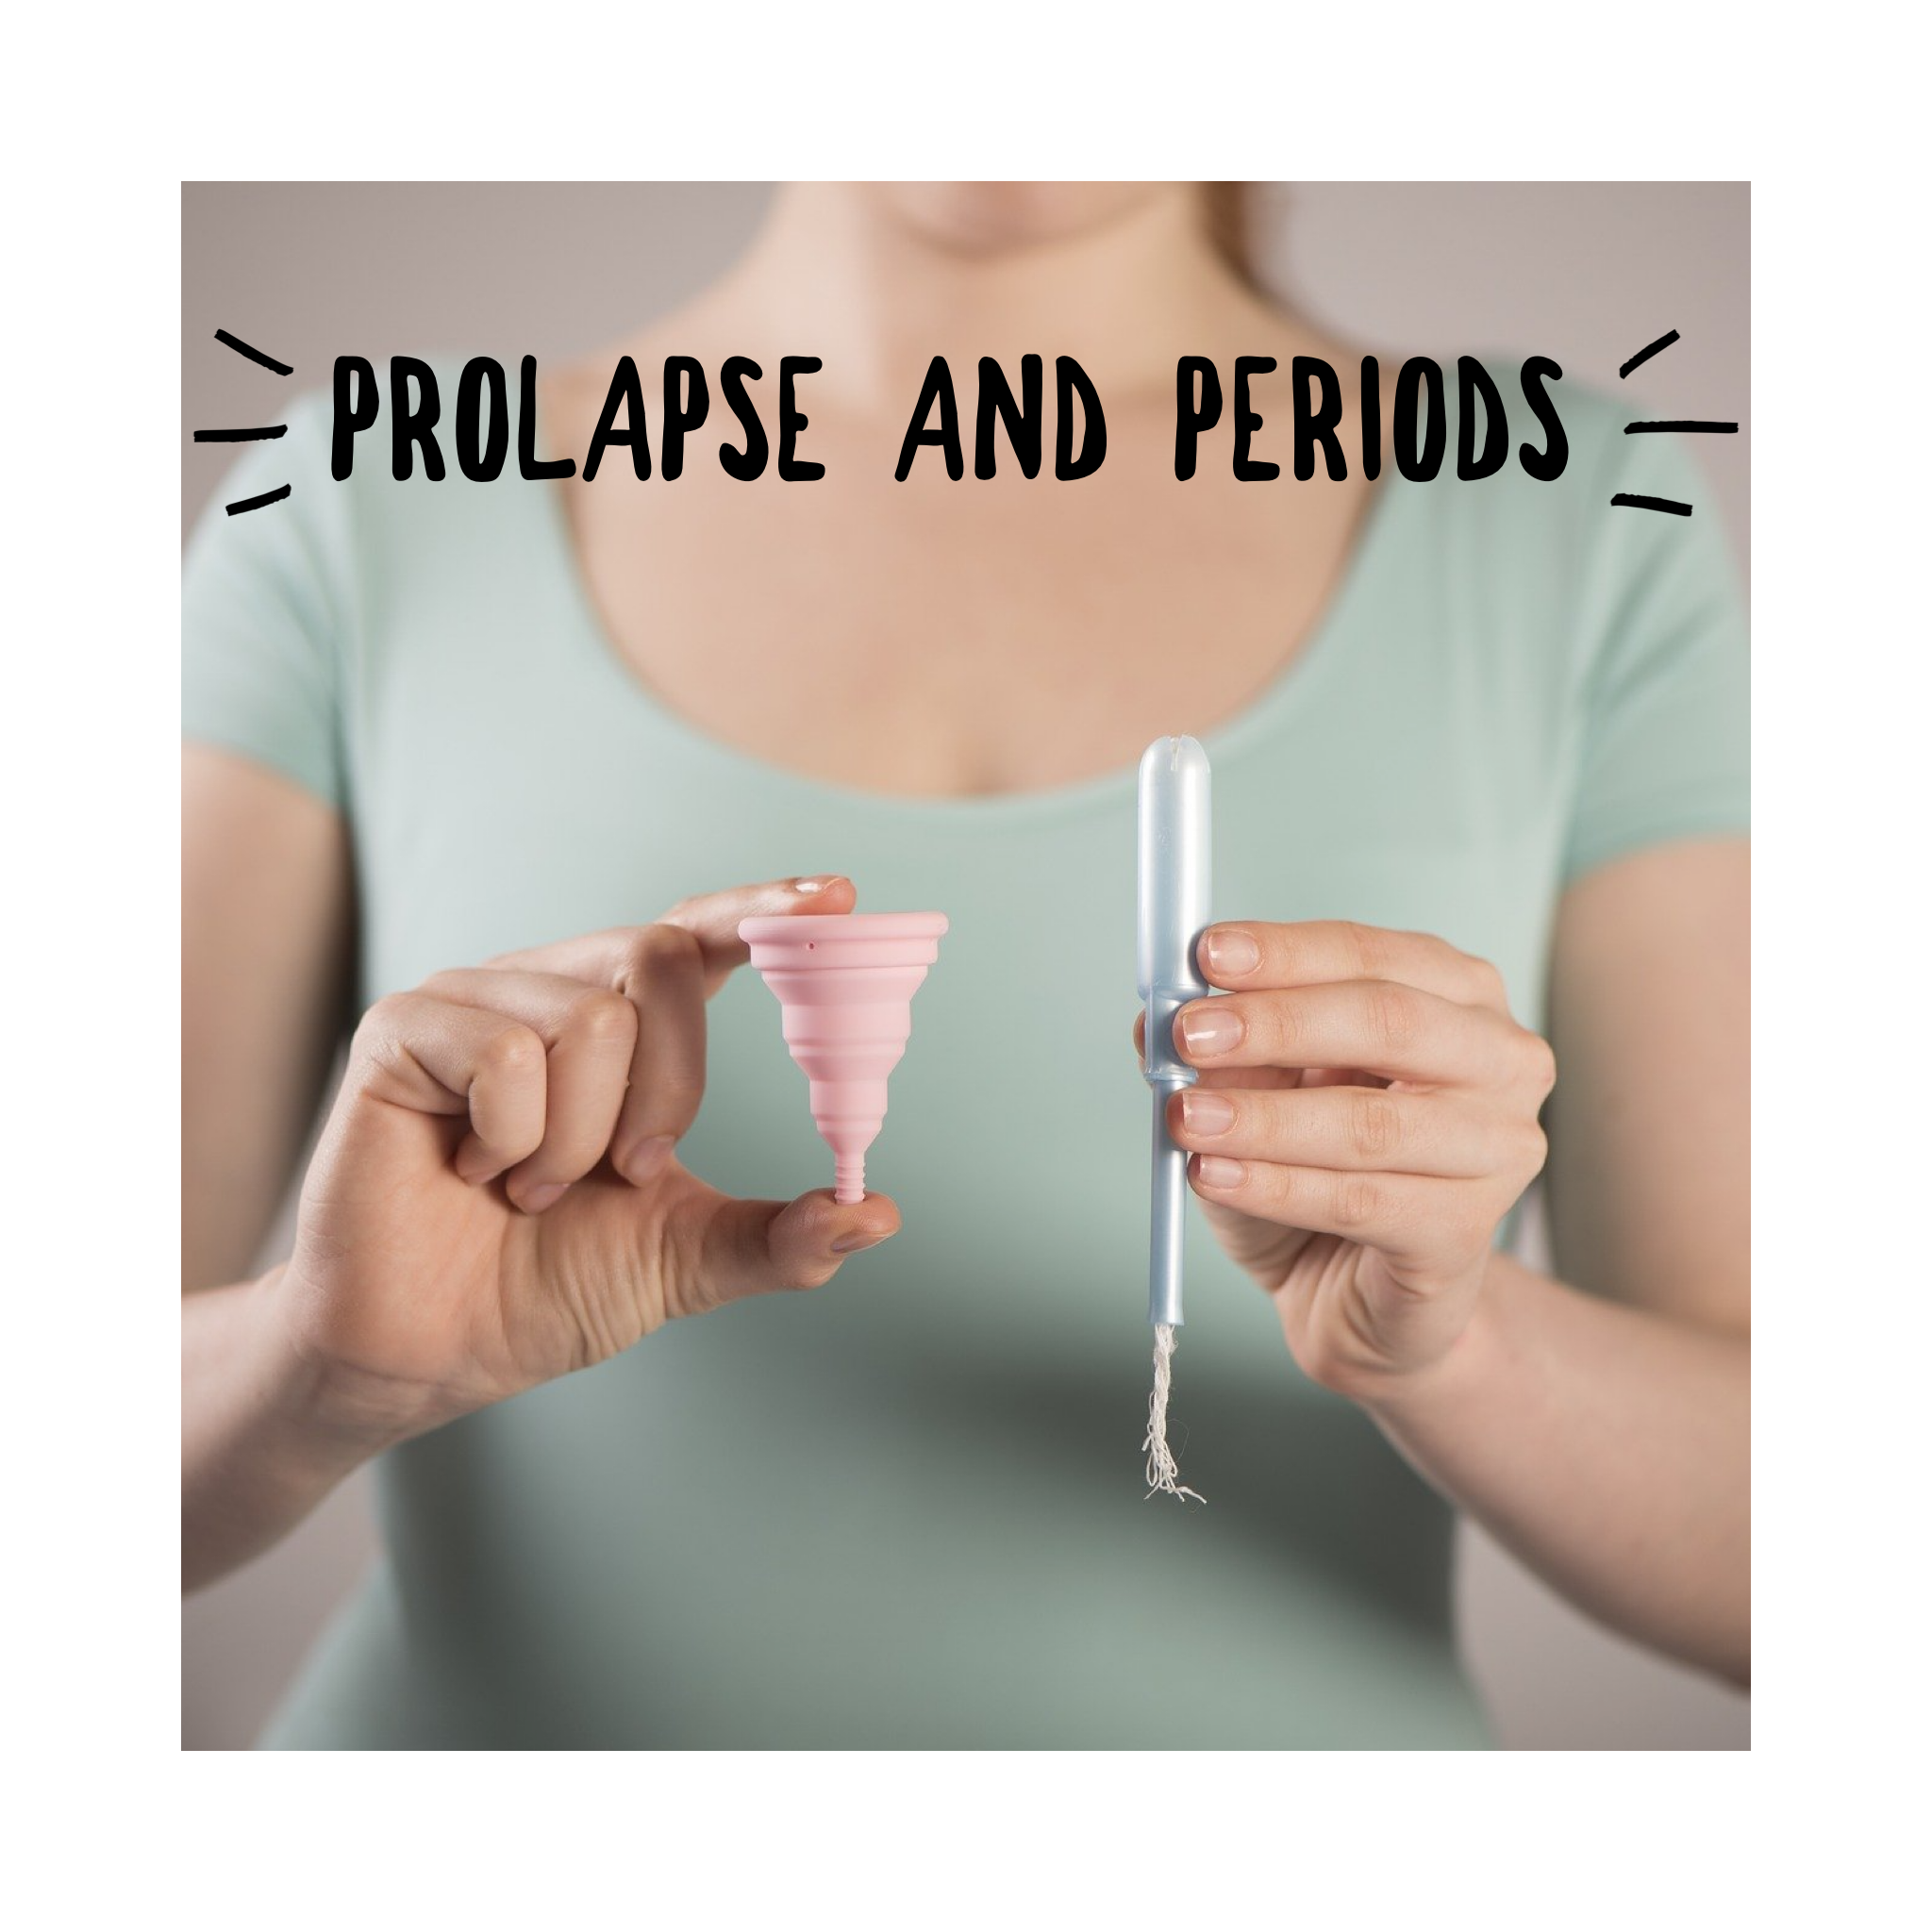 Prolapse and Periods, lets talk about it... pic